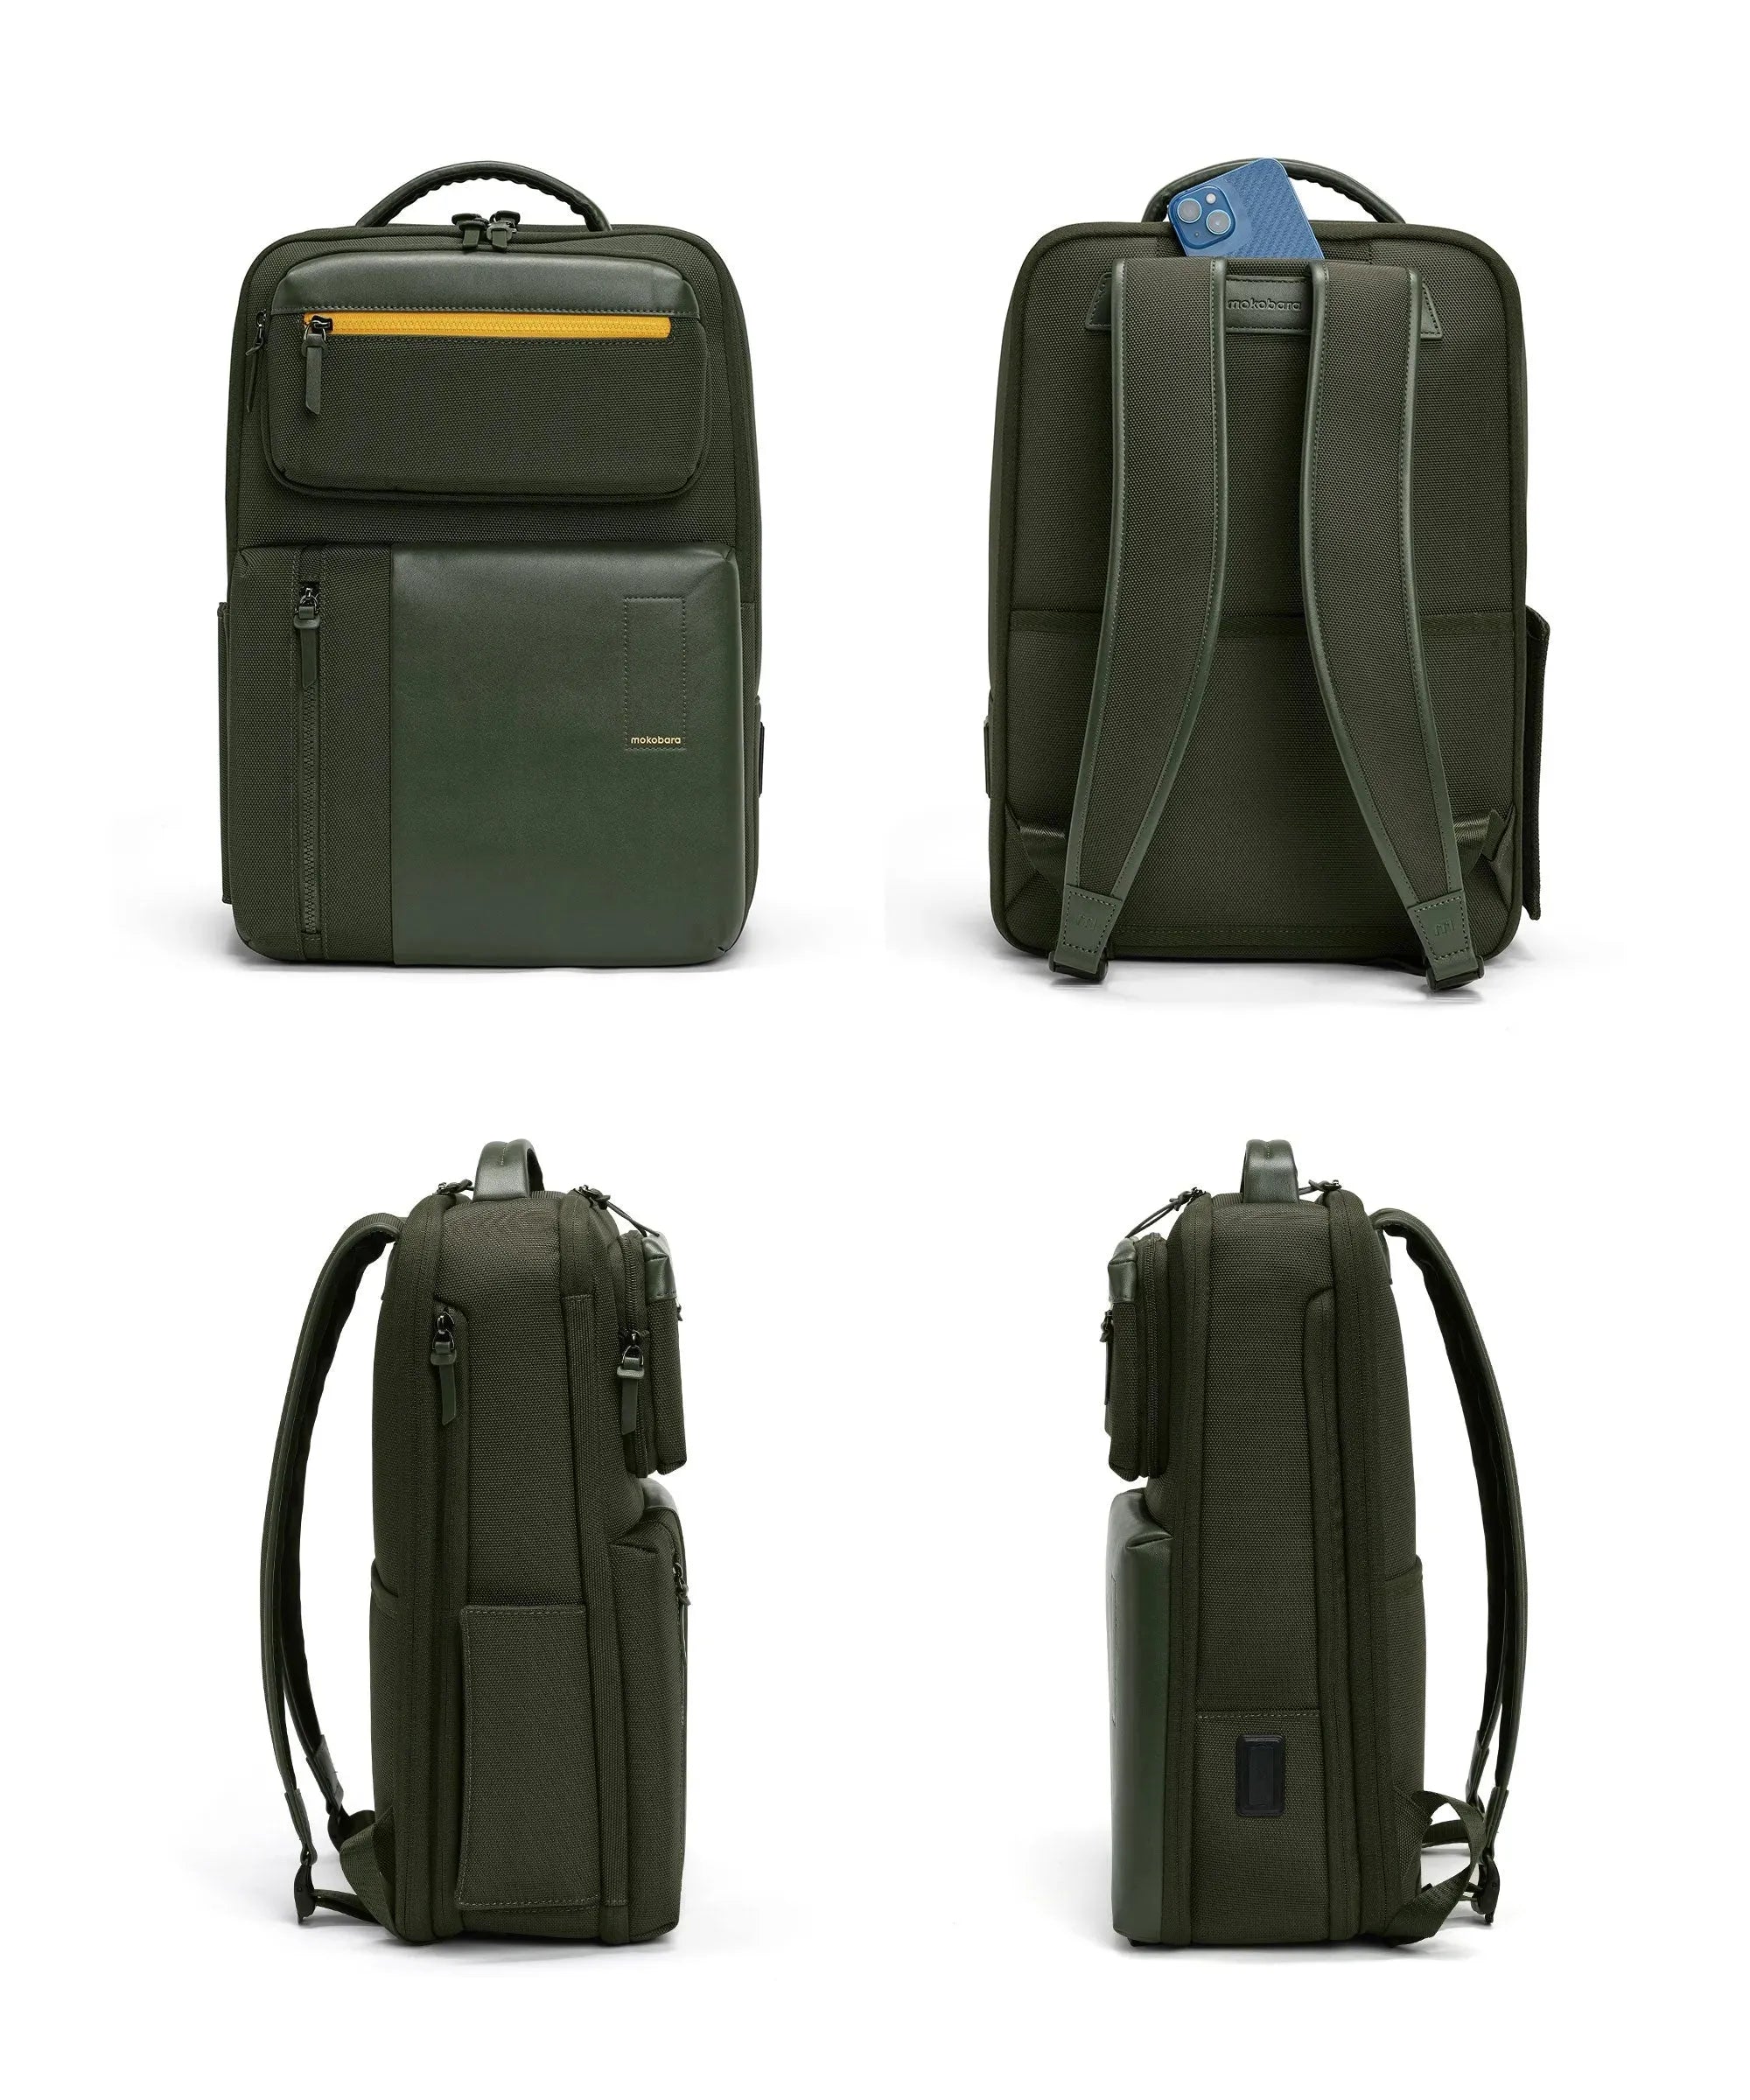 Color_Home Grown Sunray | The Overnighter Backpack